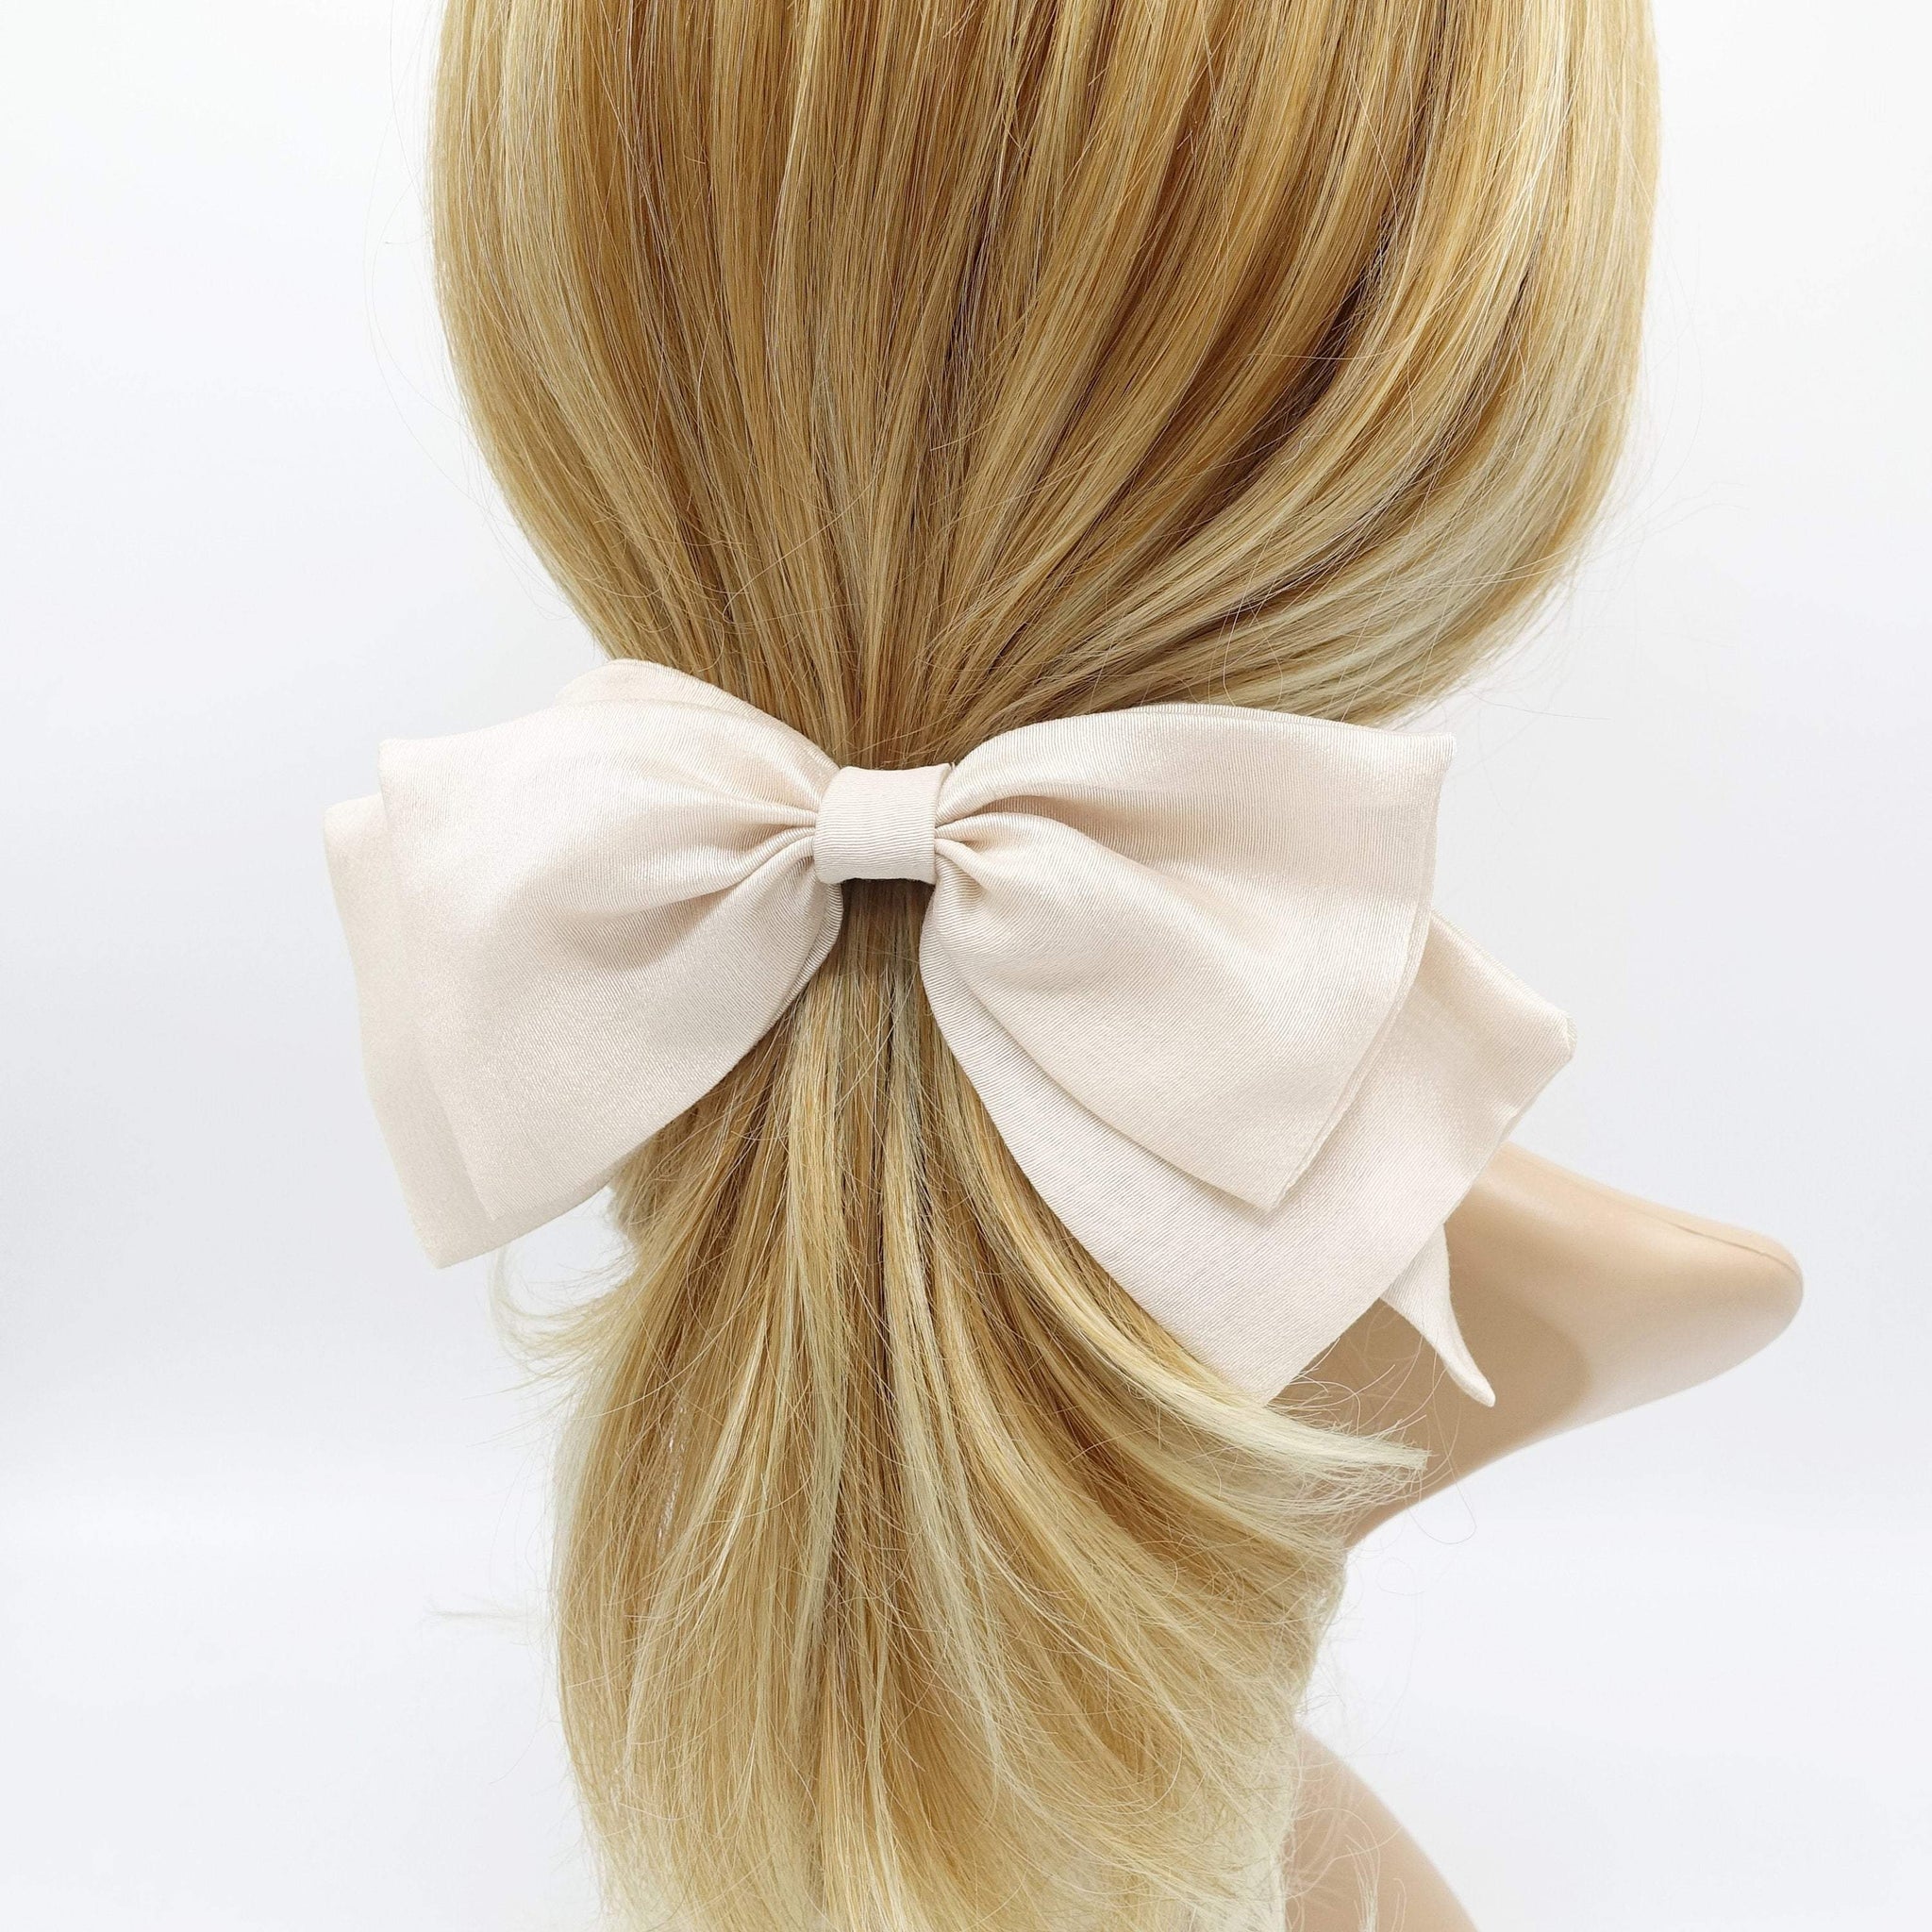 VeryShine claw/banana/barrette Beige floppy hair bow stacked hair bow for women